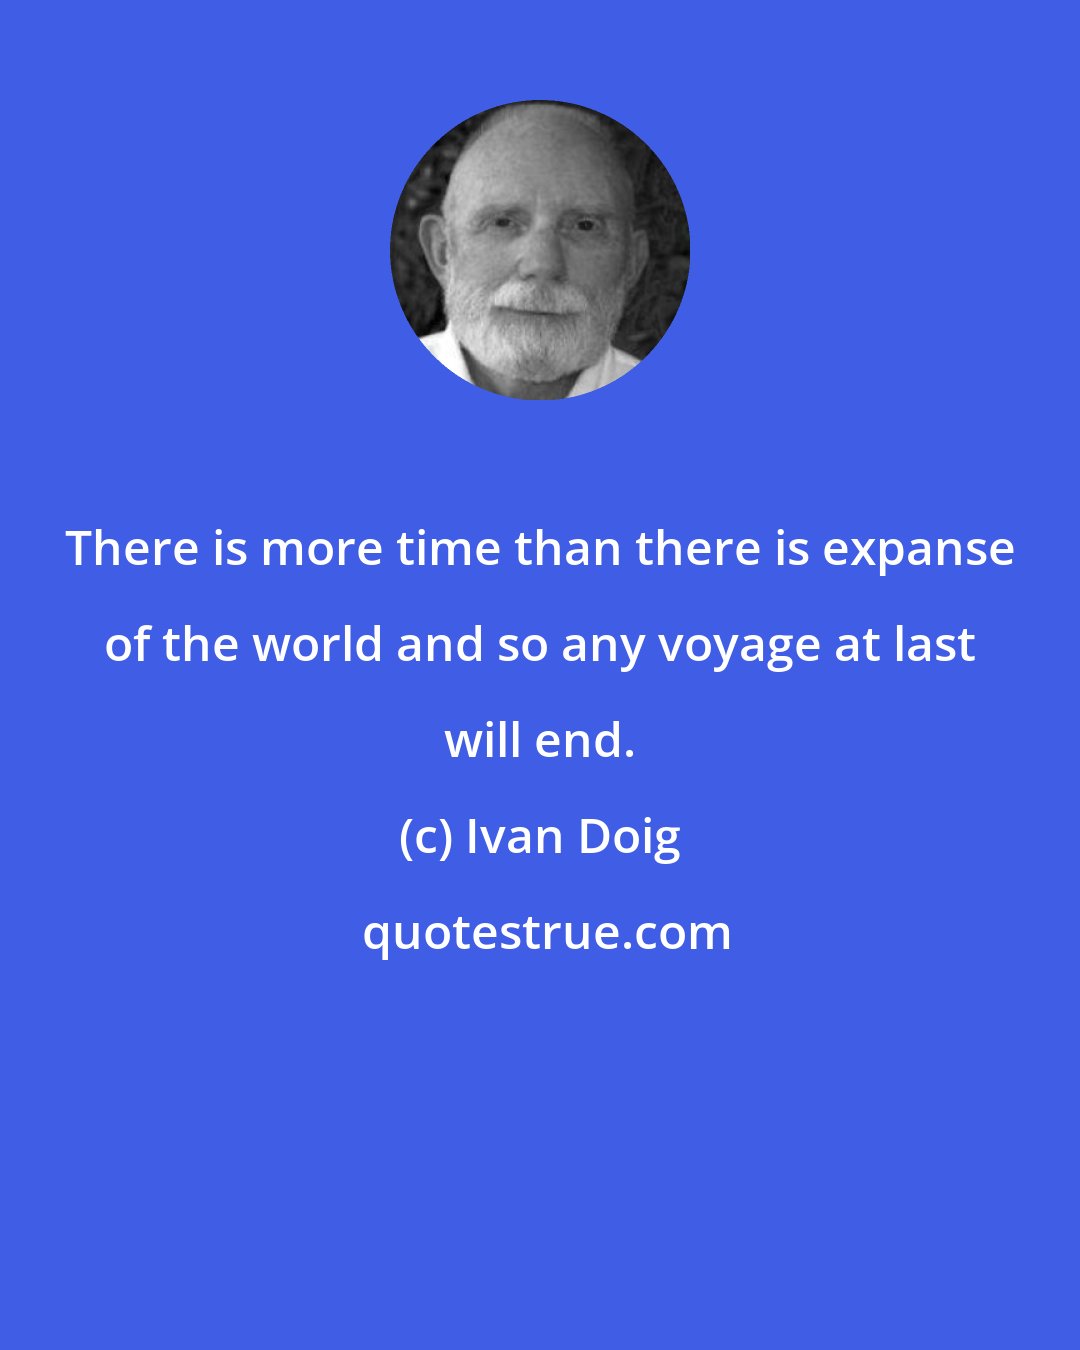 Ivan Doig: There is more time than there is expanse of the world and so any voyage at last will end.